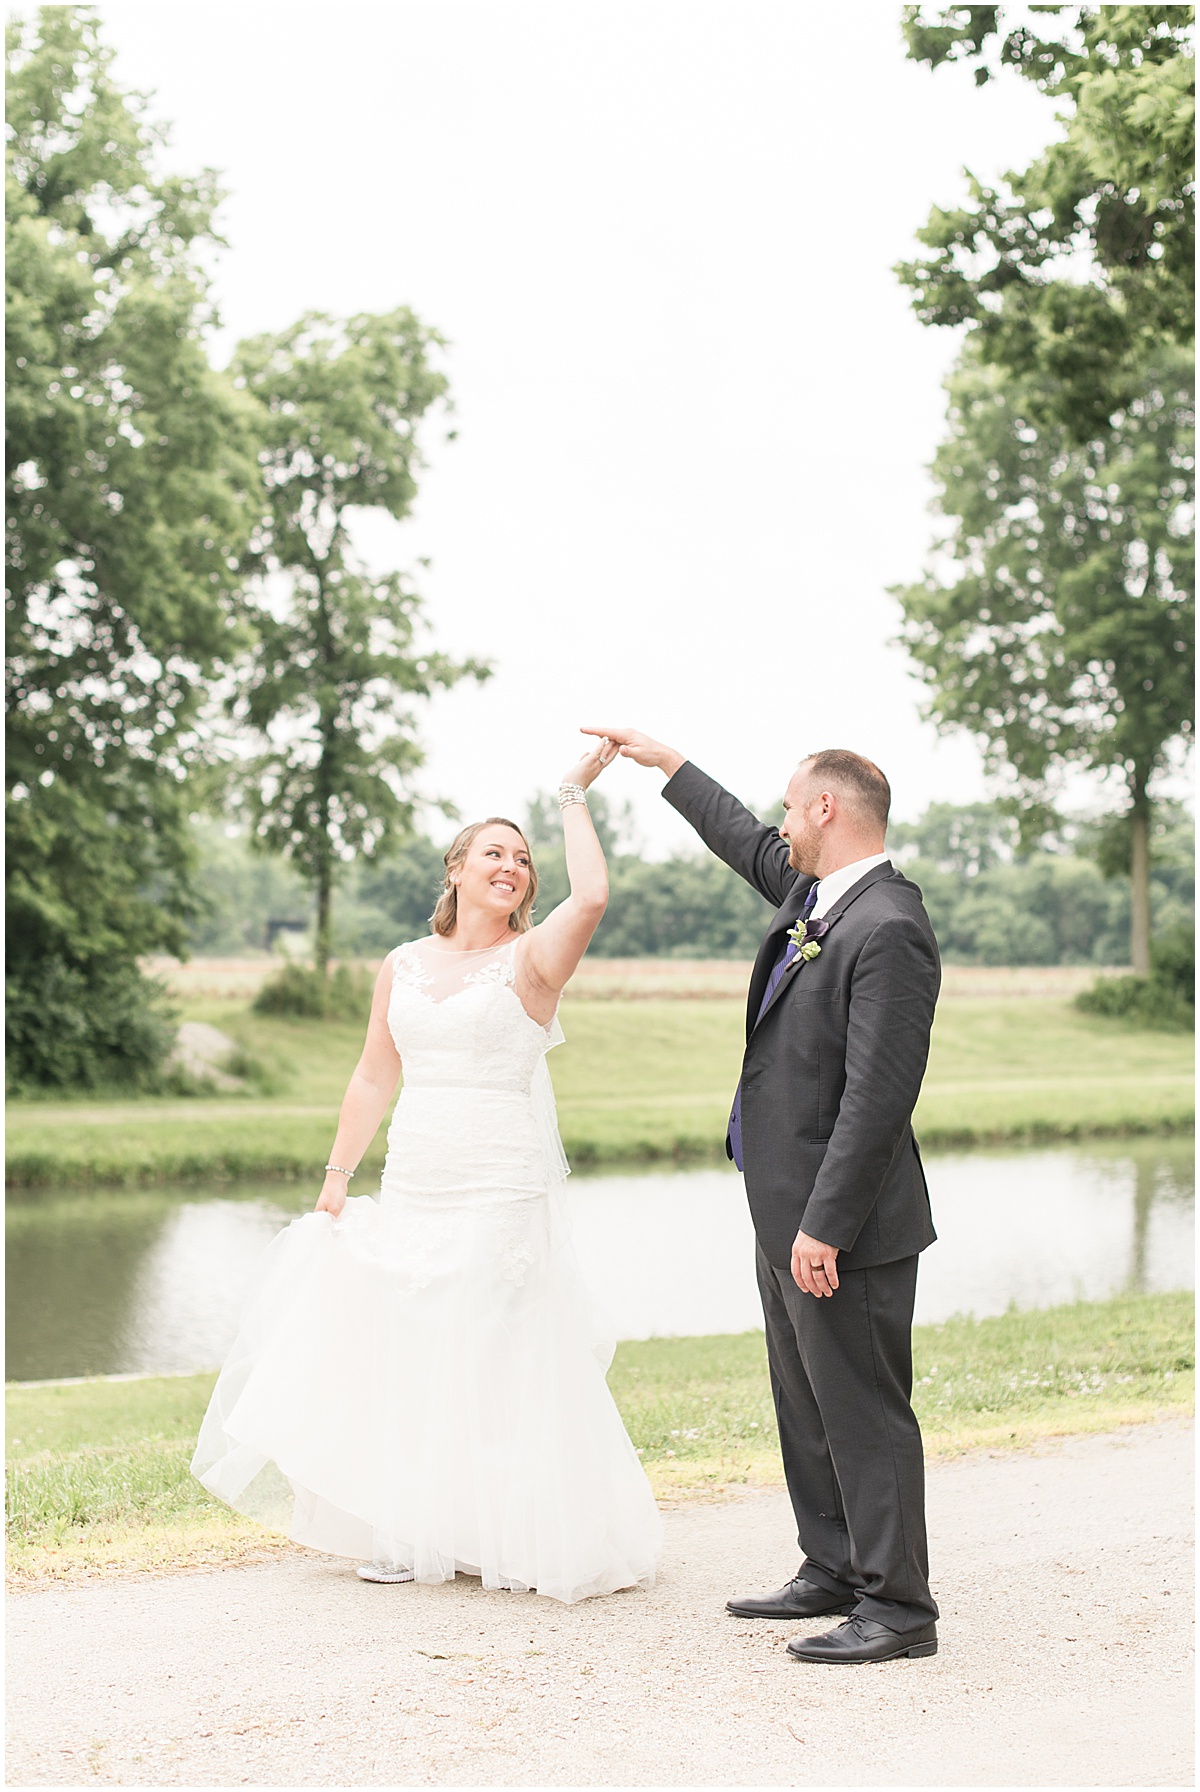 Wedding at the Wabash Erie Canal Park in Delphi, Indiana